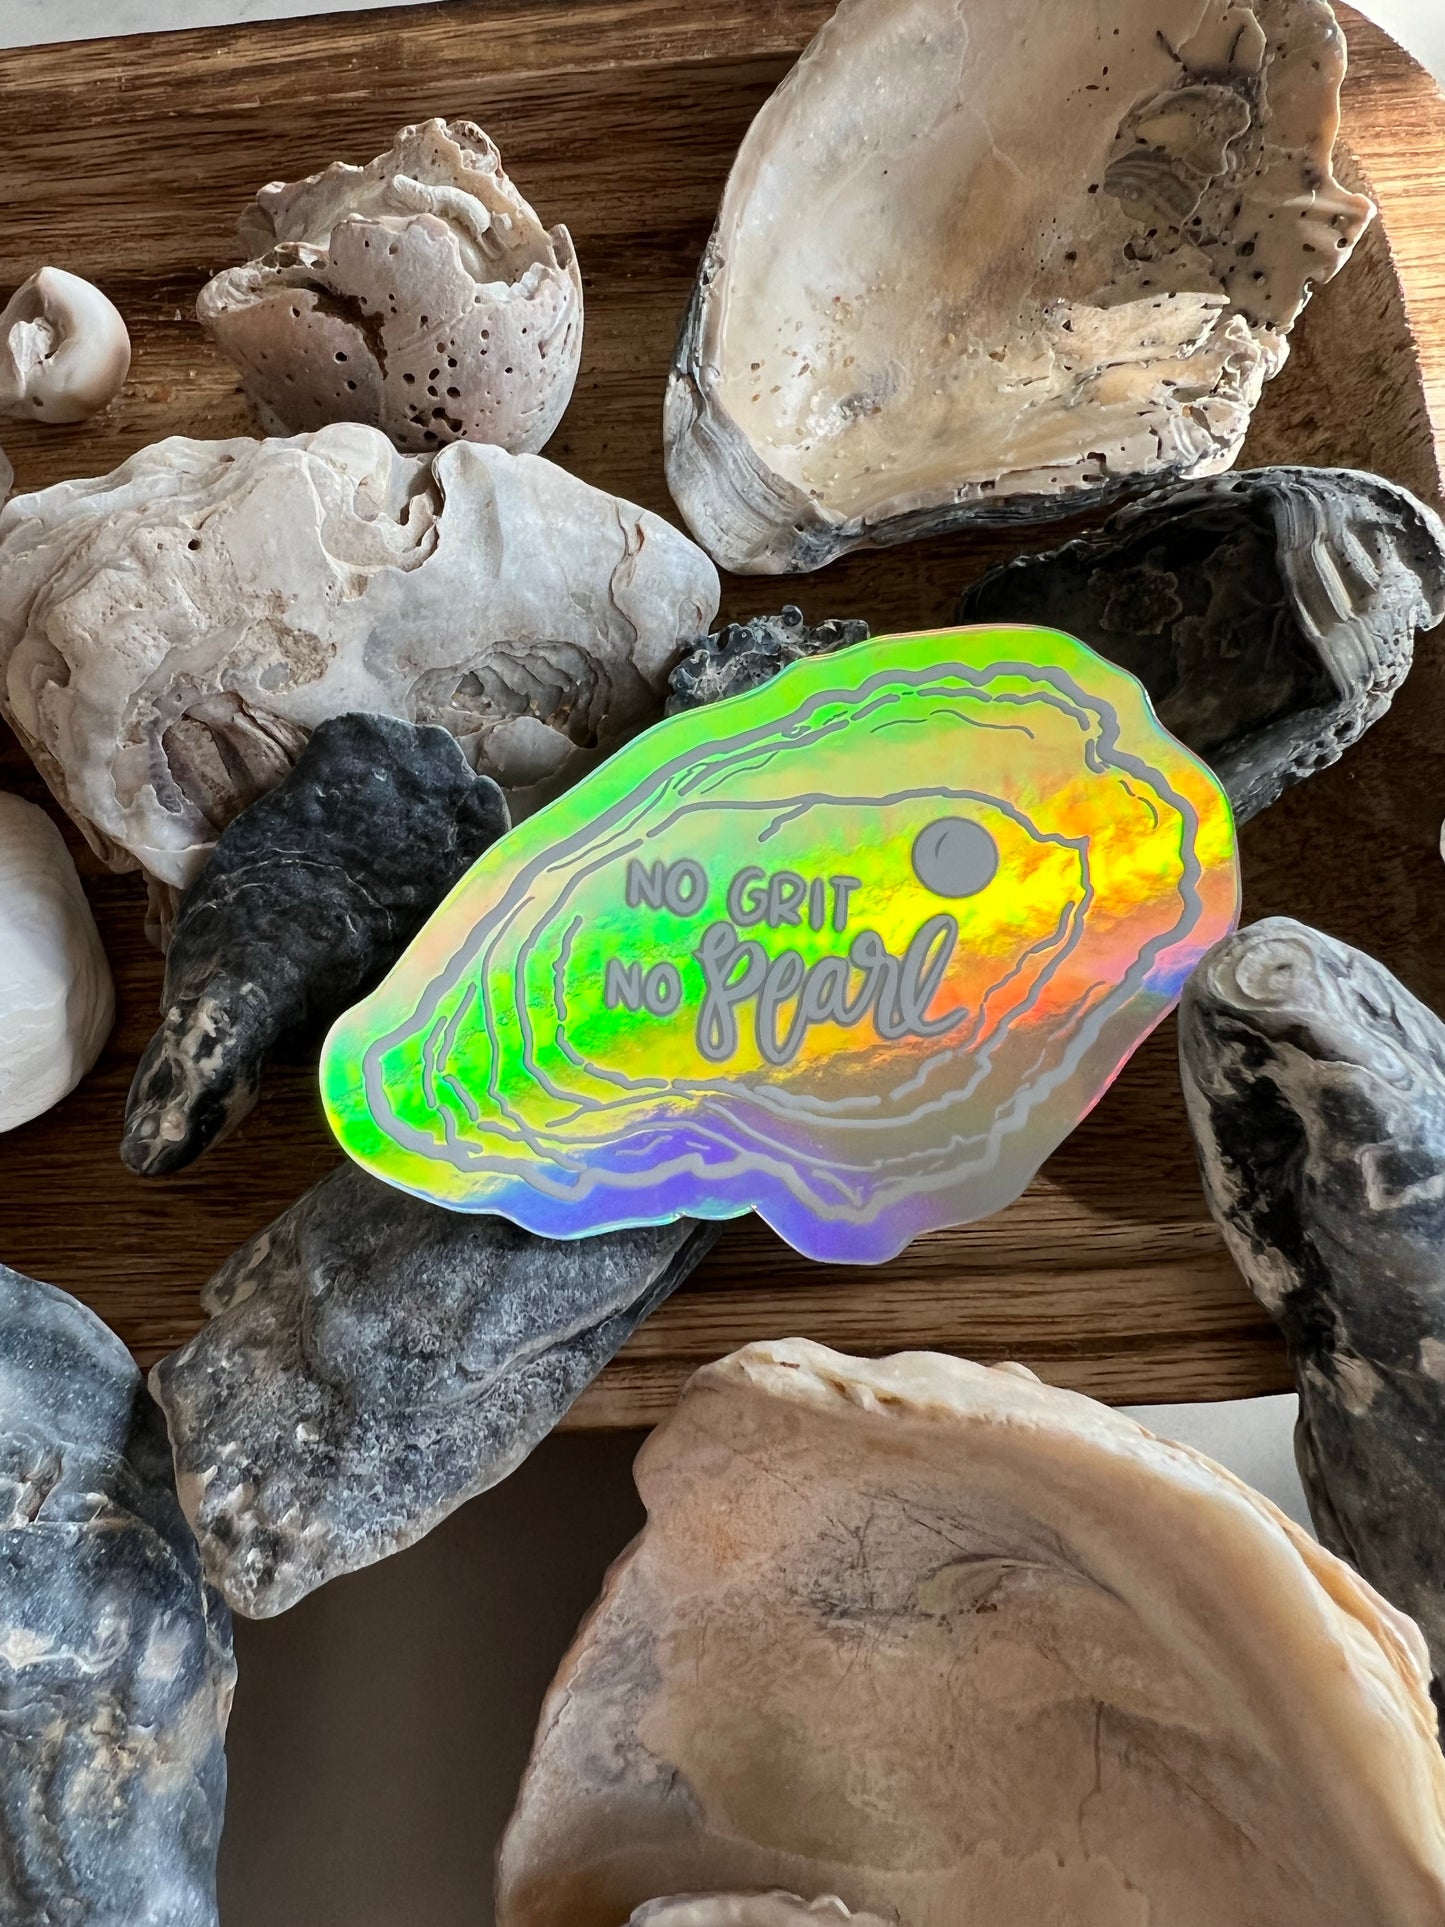 Oyster holographic sticker